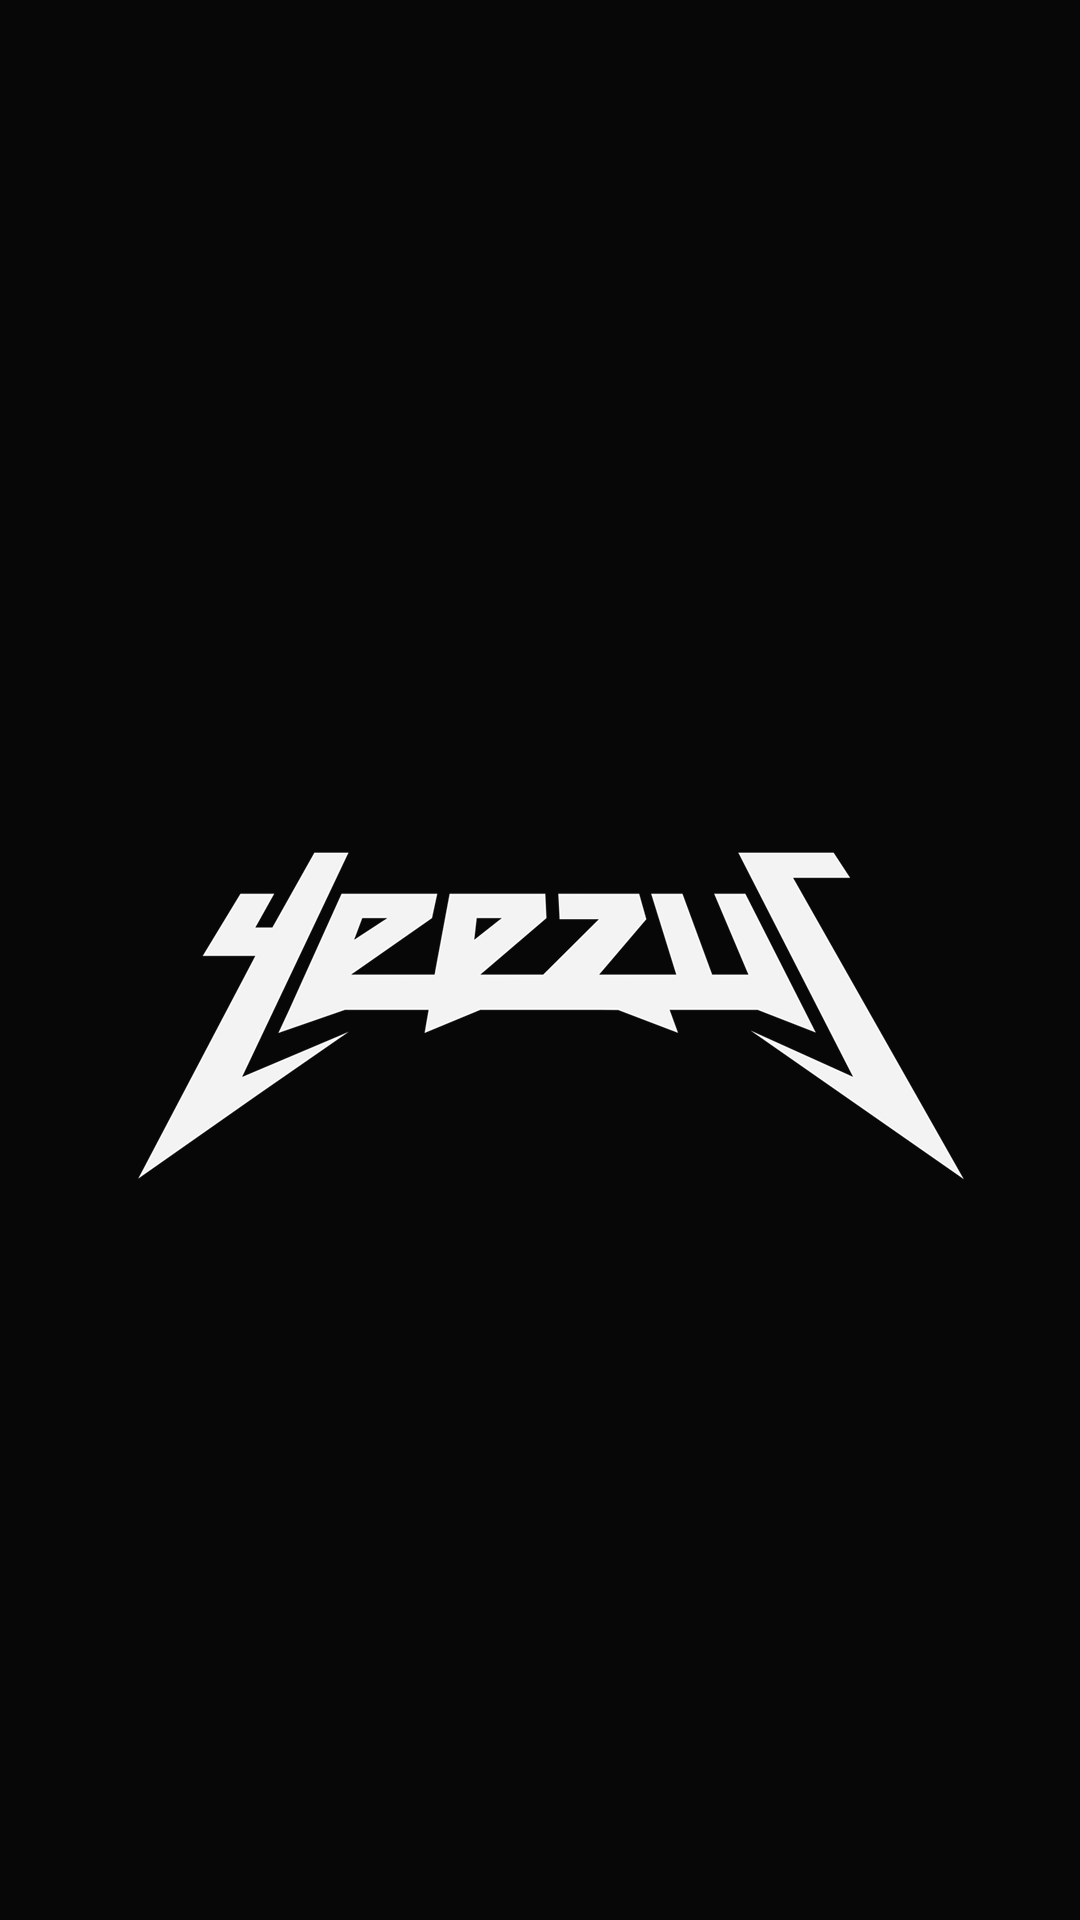 Yeezus Logo - Kanye West rips off Metallica's classic logo? Have you guys seen his ...